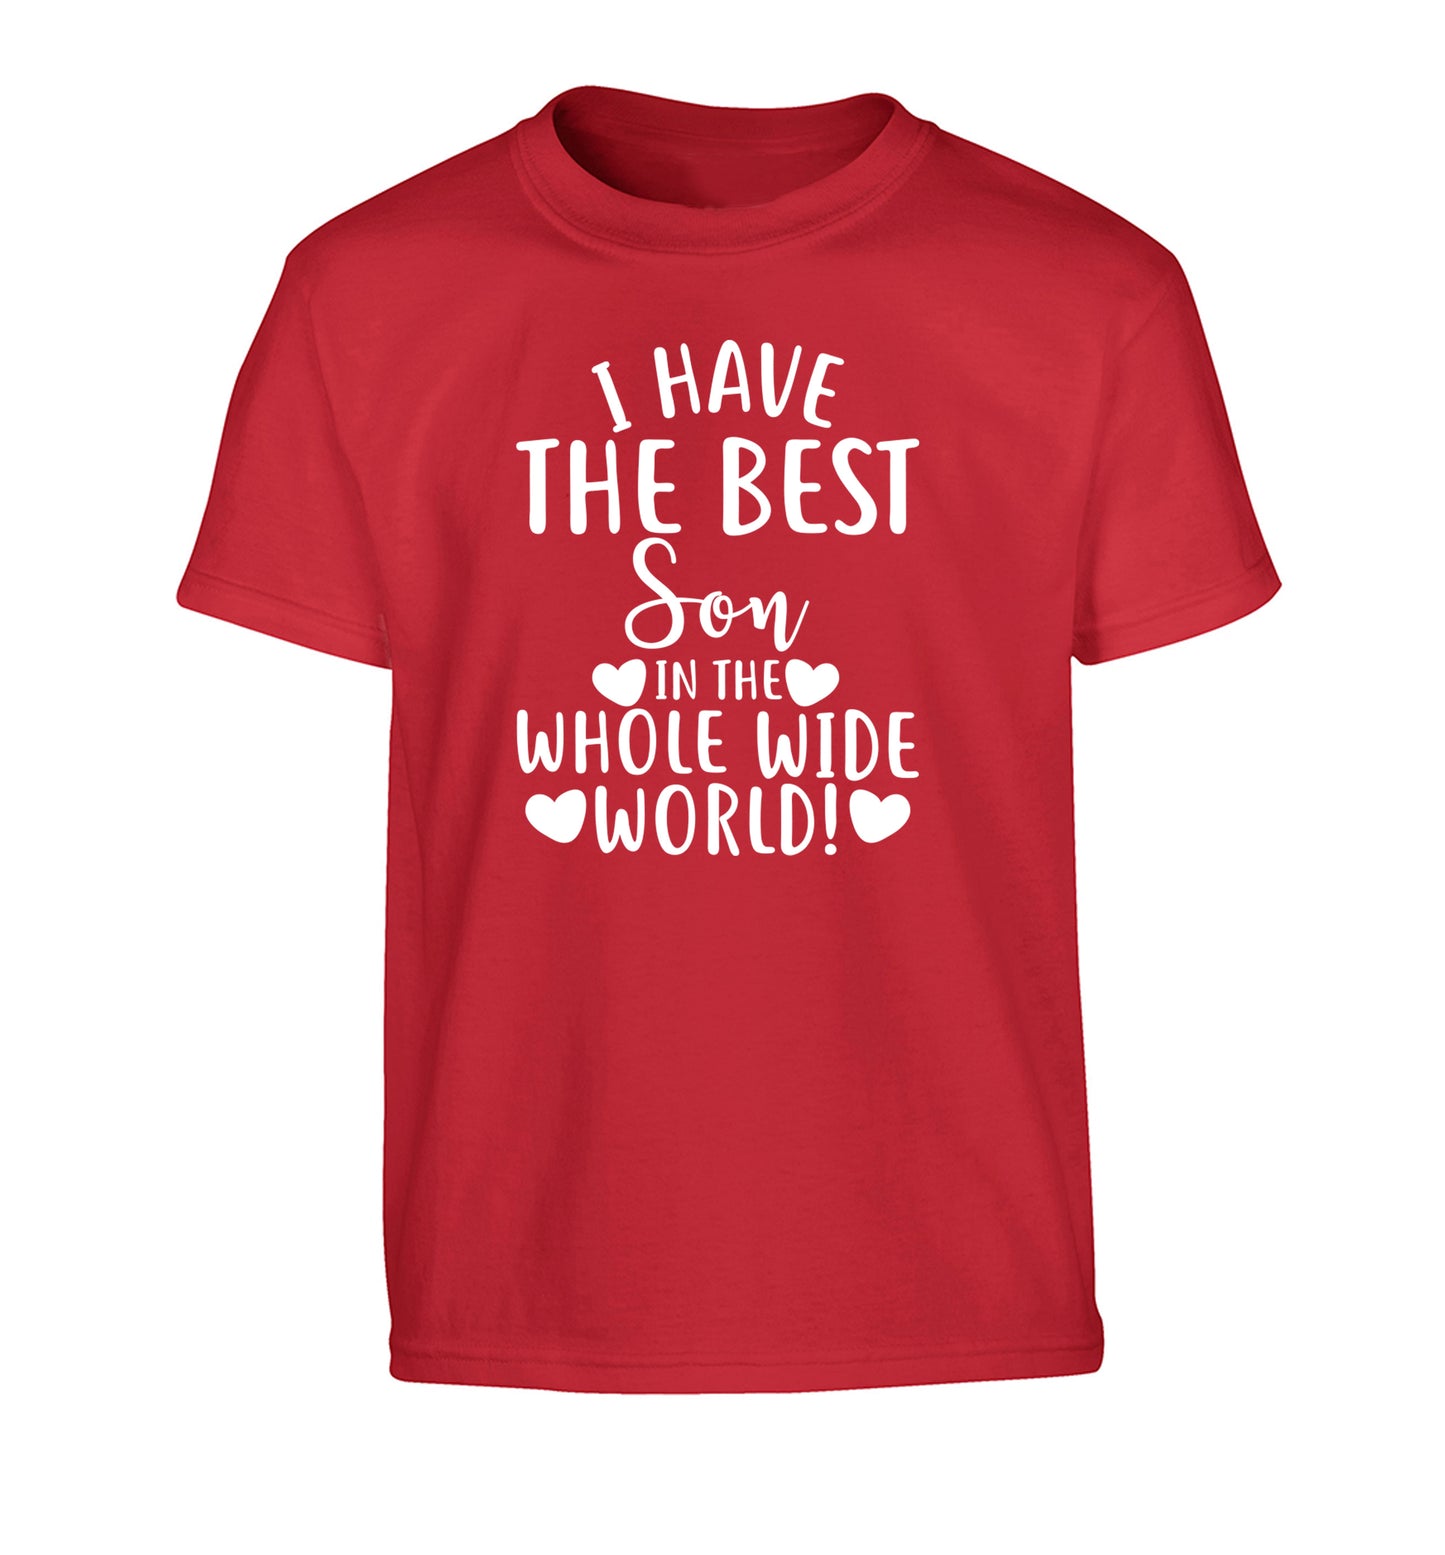 I have the best son in the whole wide world! Children's red Tshirt 12-13 Years